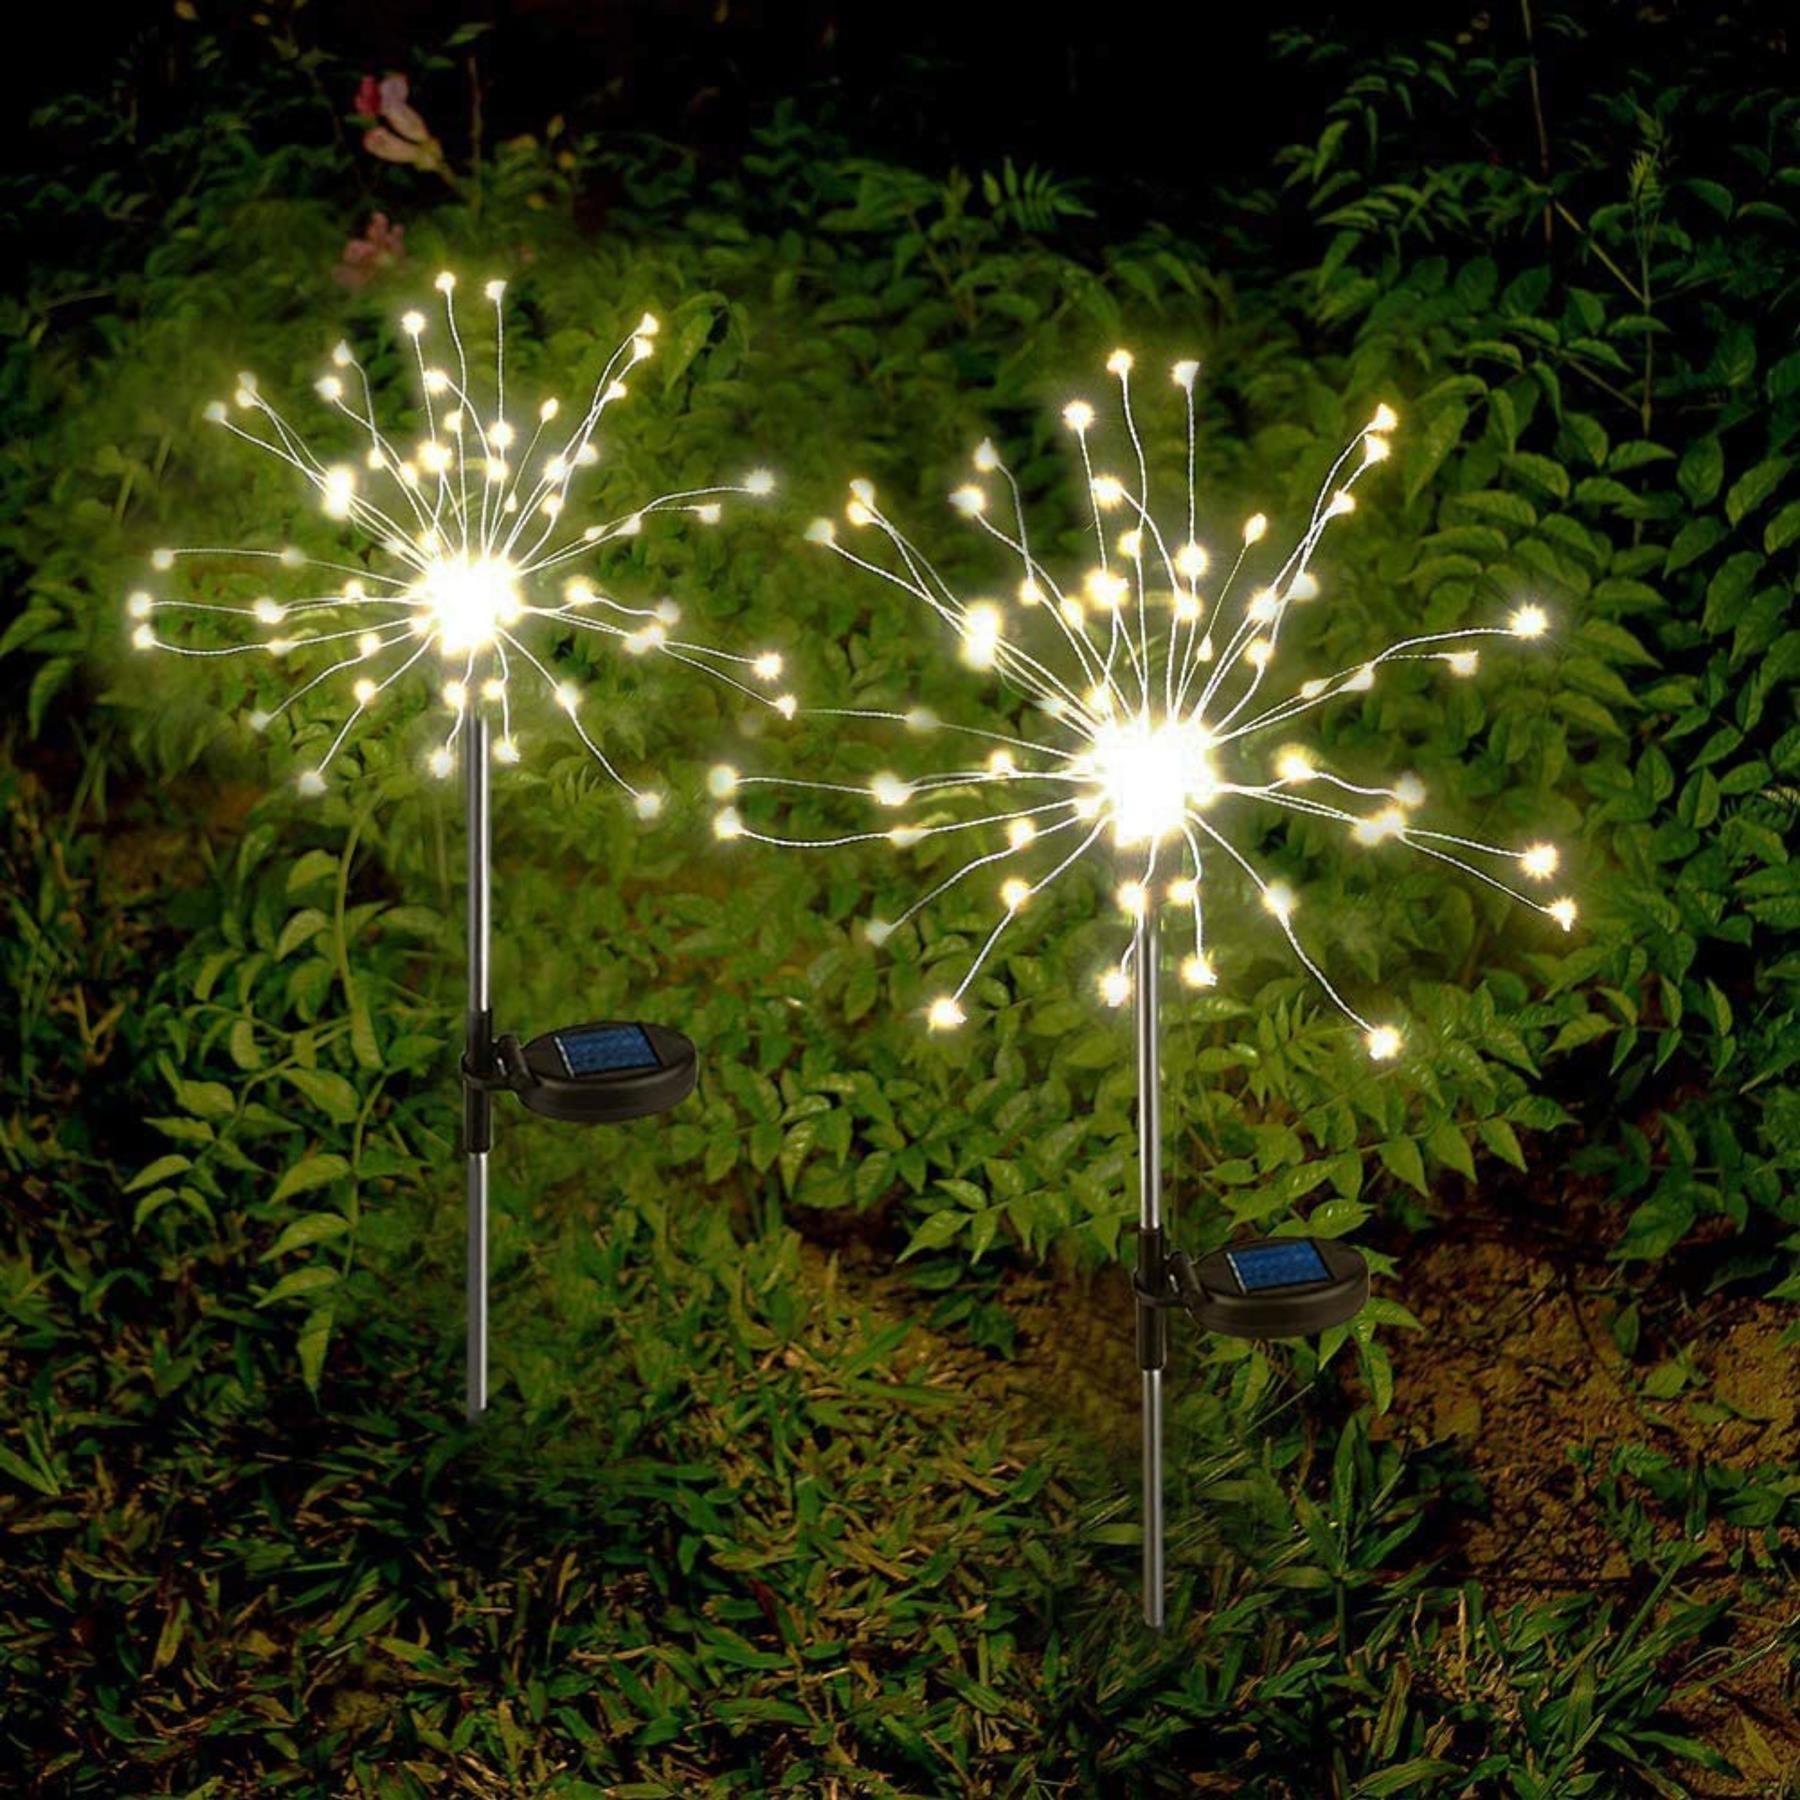 90 Led Starburst Solar Powered Stake Lights 2 Pack by Geezy - The Magic Toy Shop